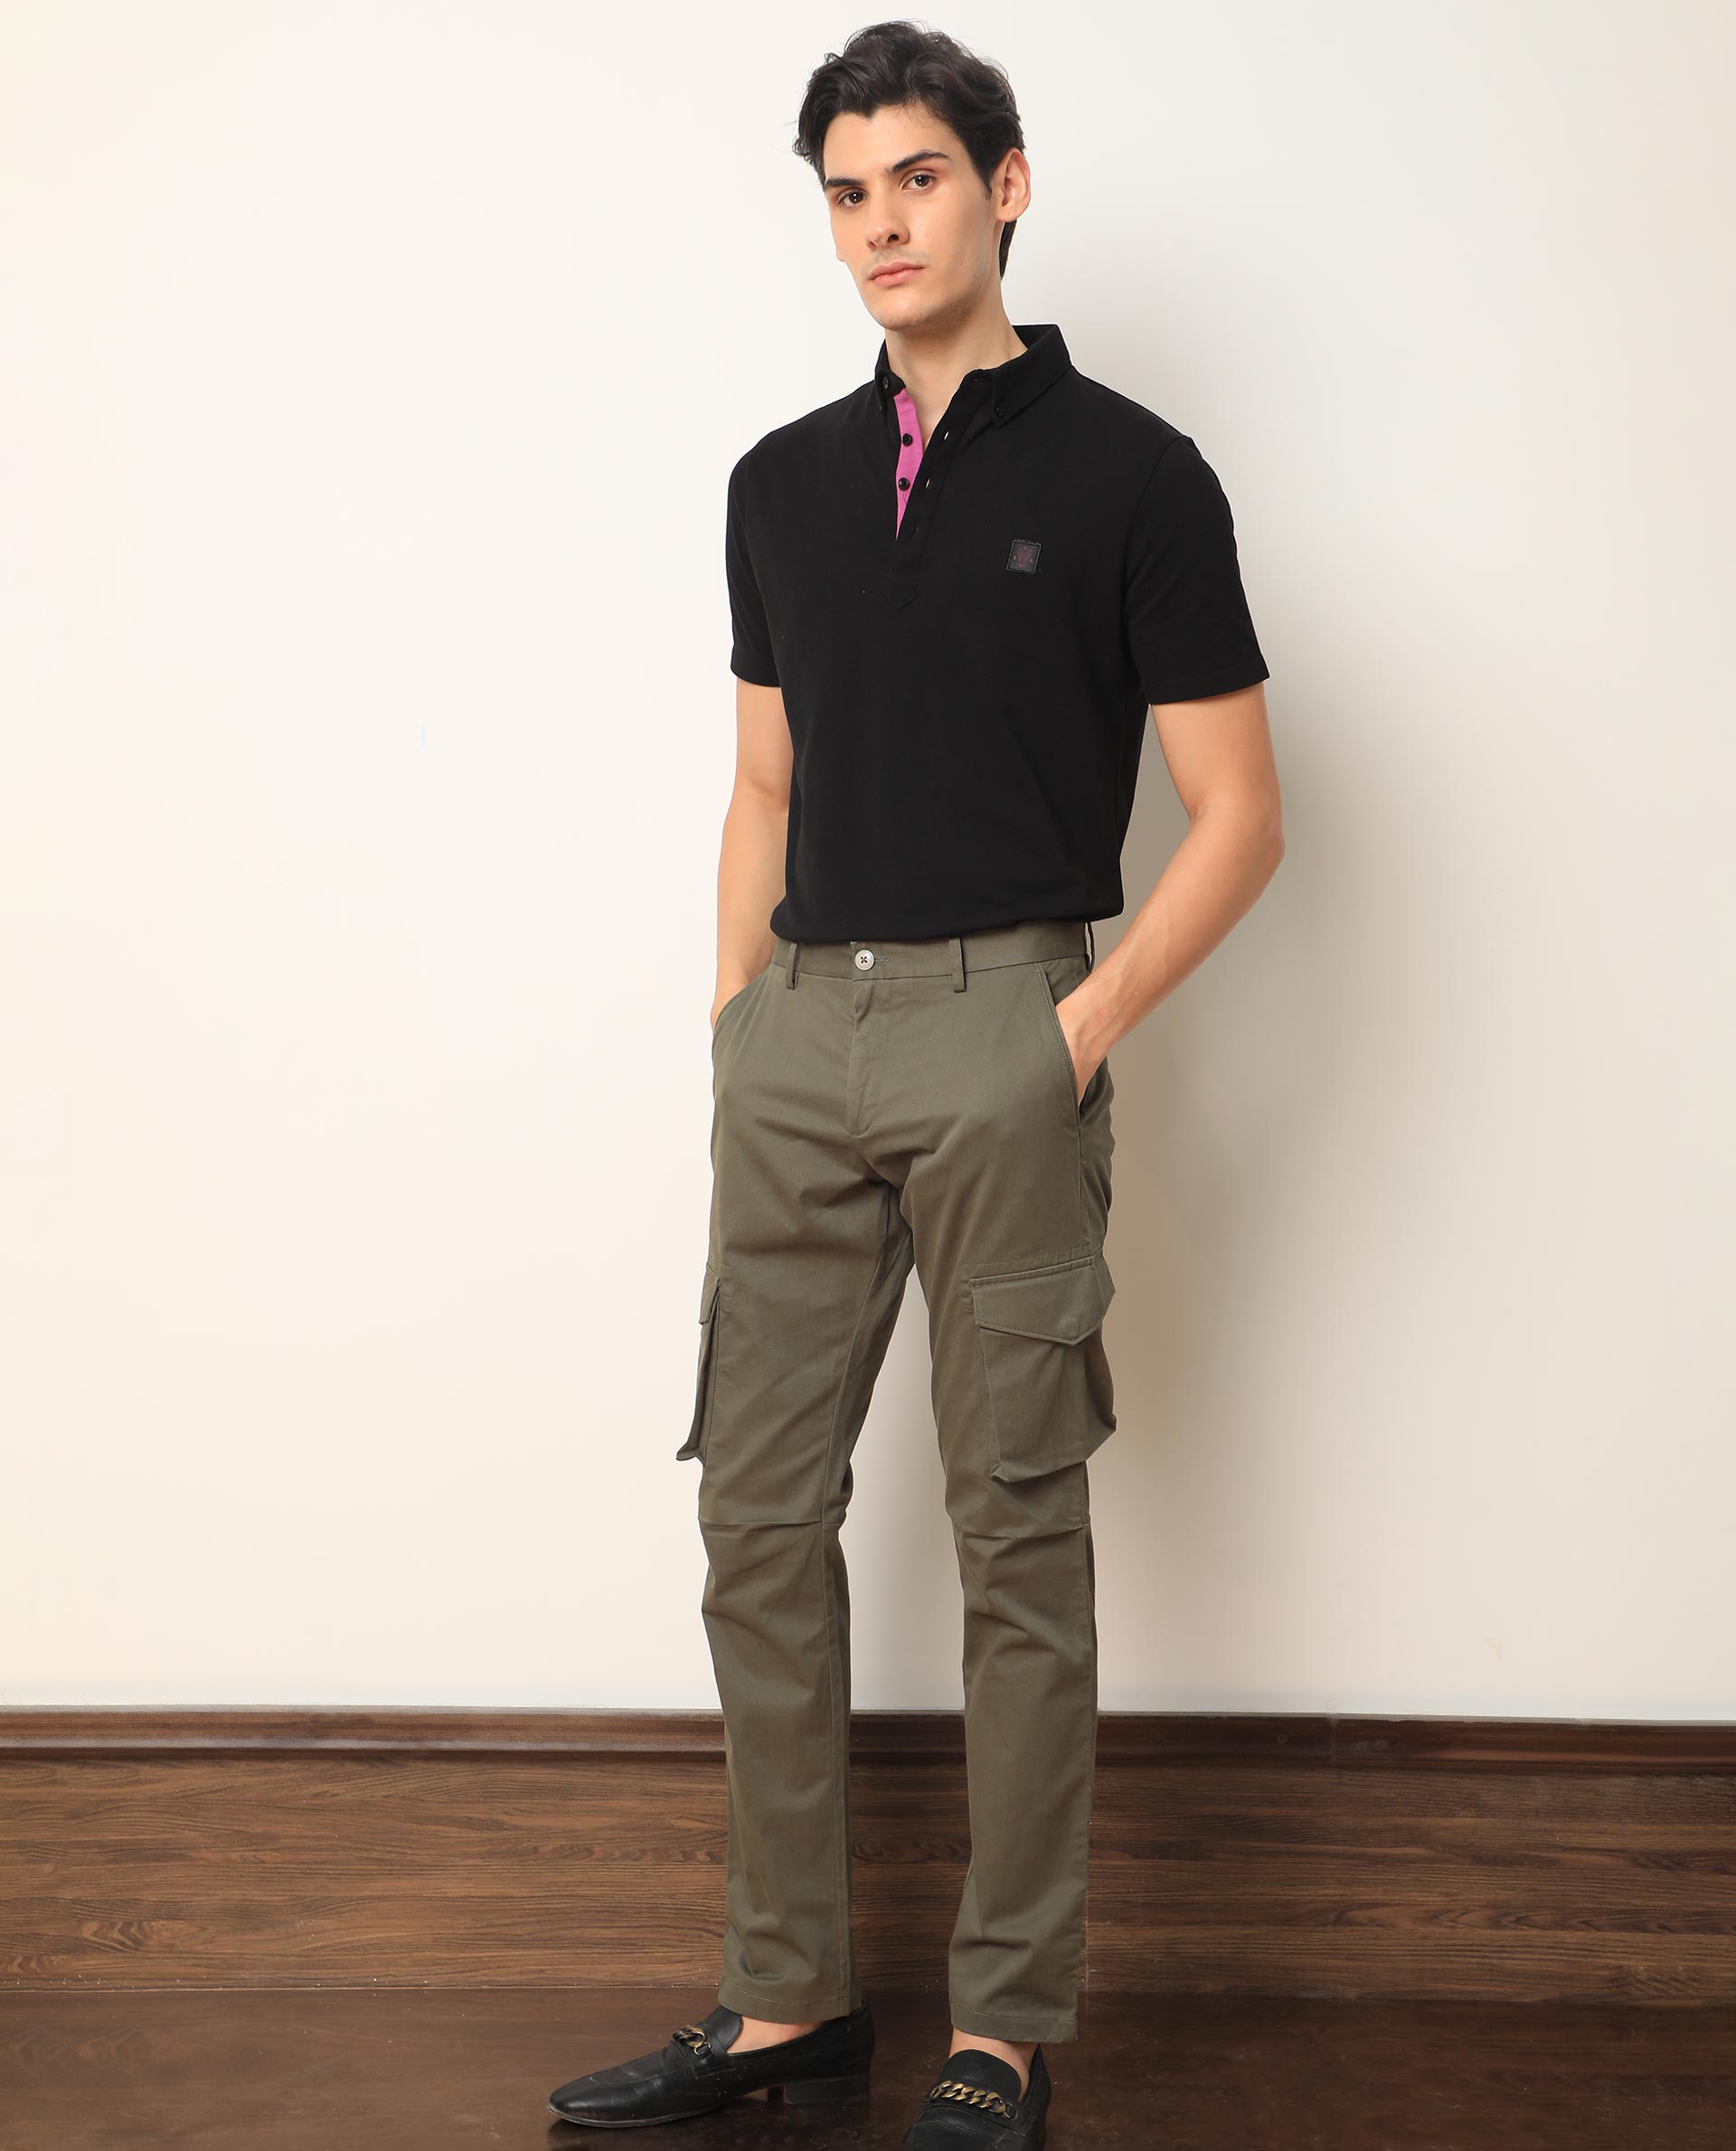 What does everyone choose for cargo pants? - Tistabene